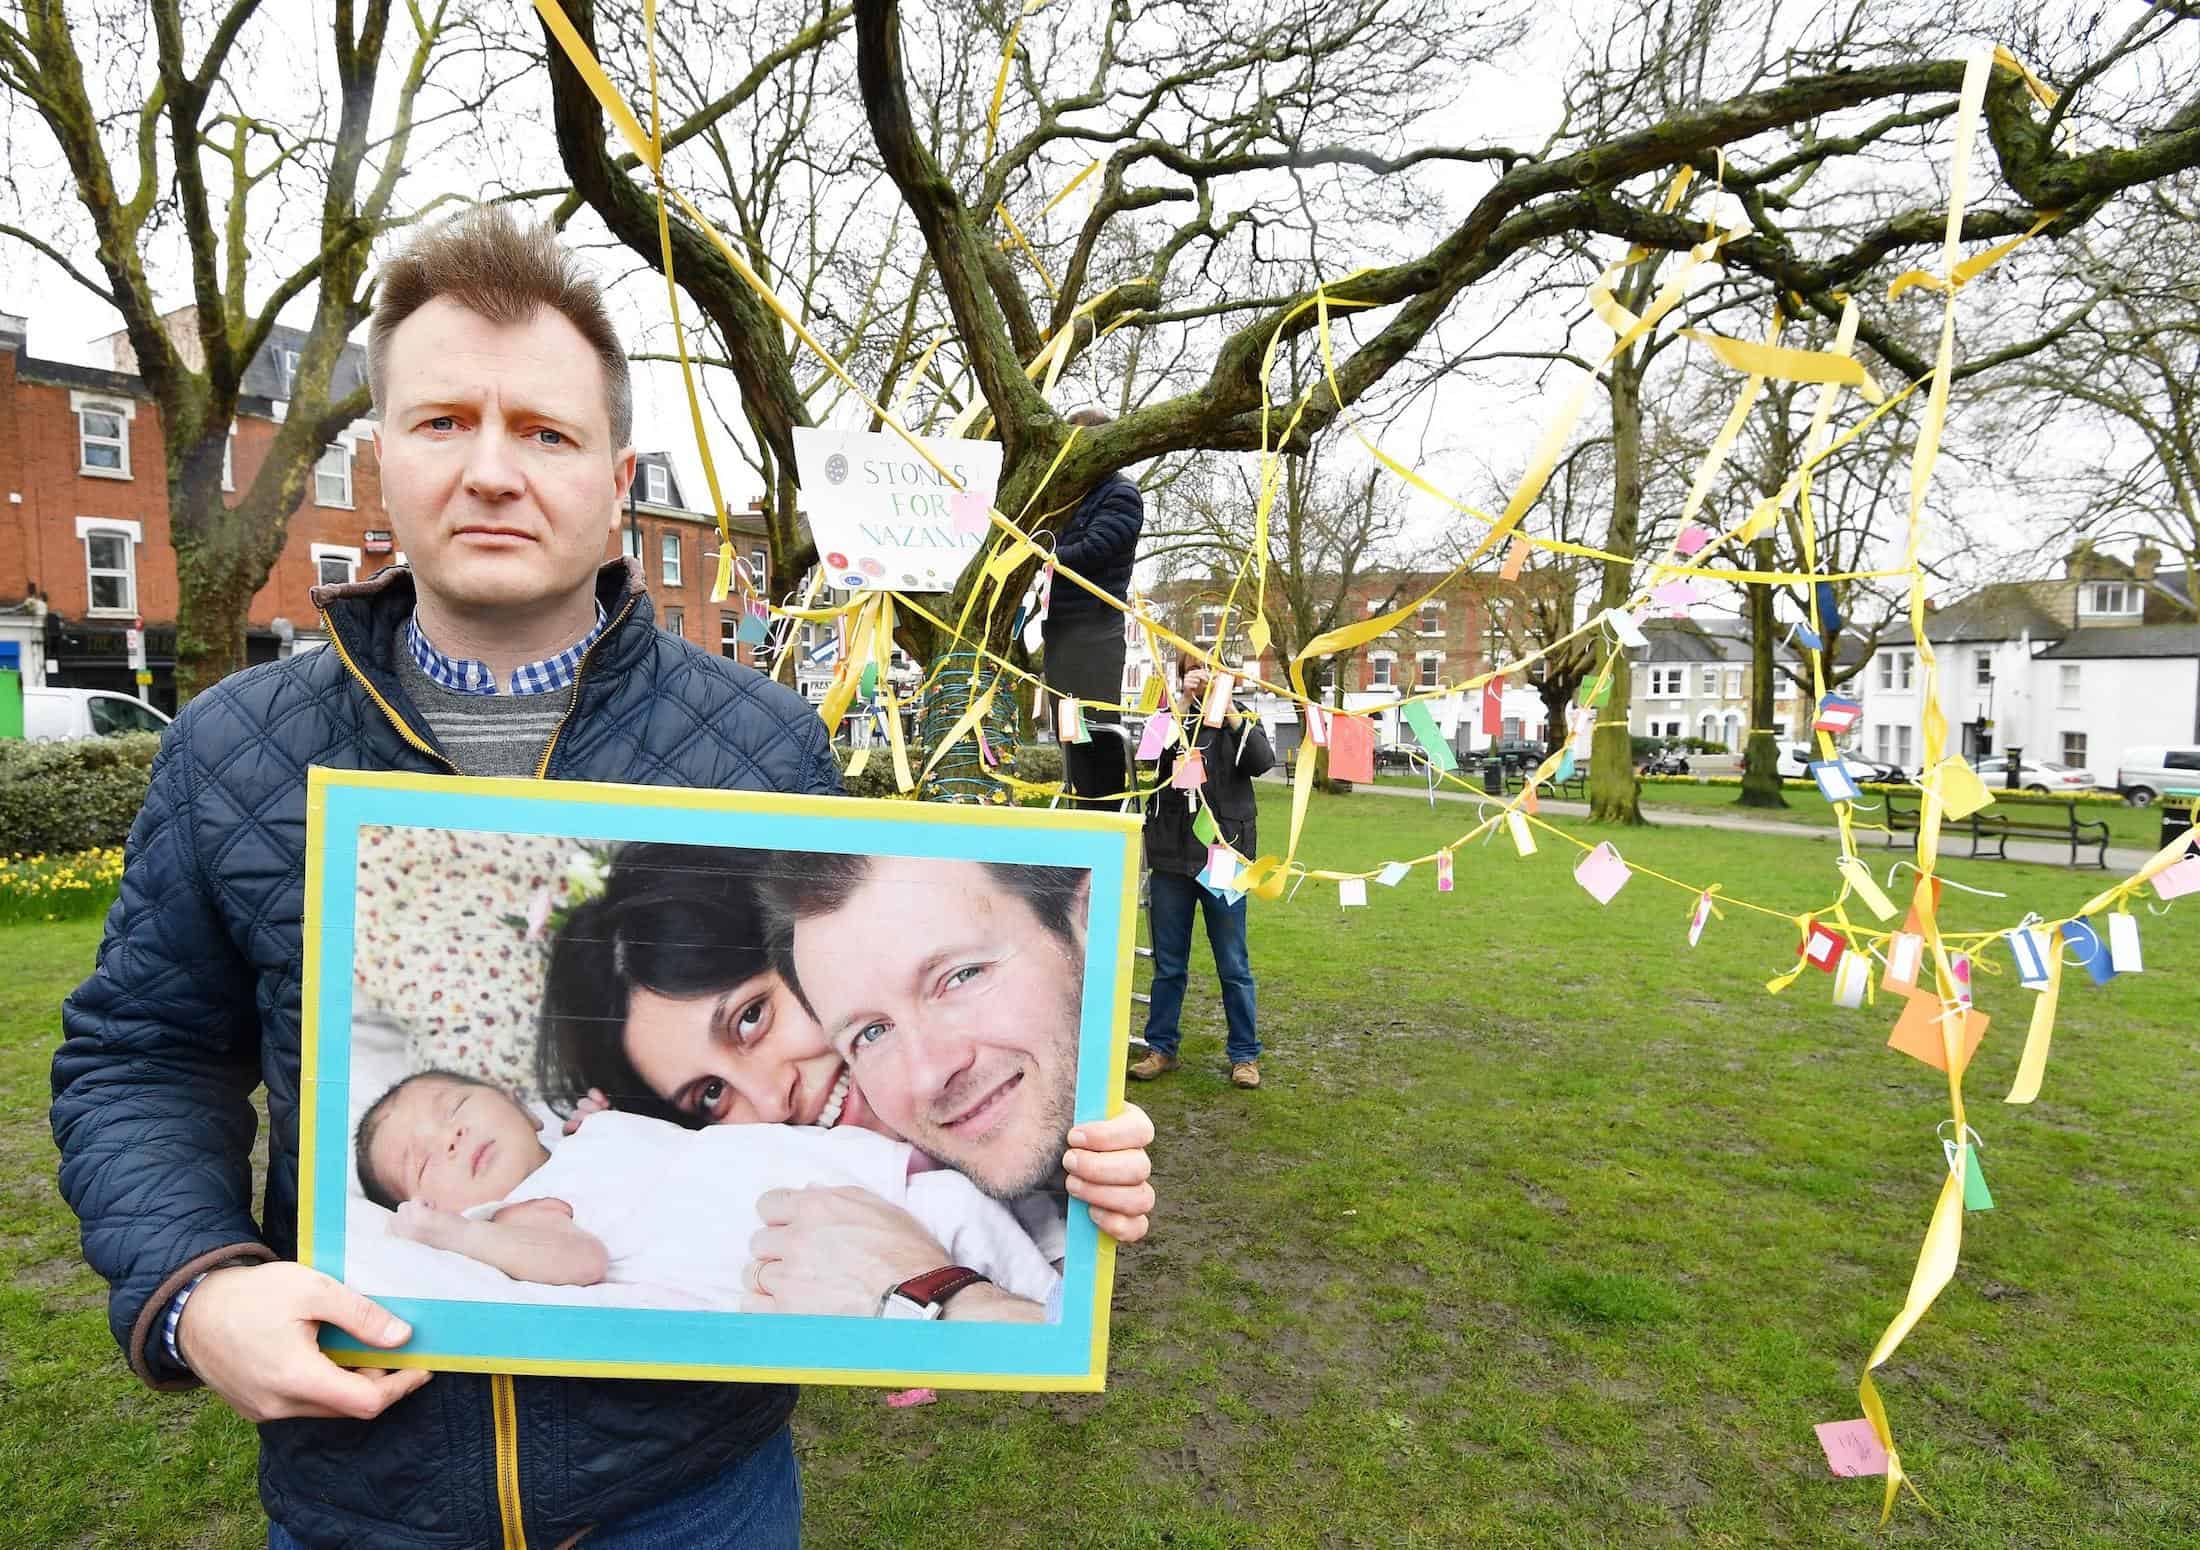 Nazanin Zaghari-Ratcliffe ‘summoned to court and told to pack a bag for prison’